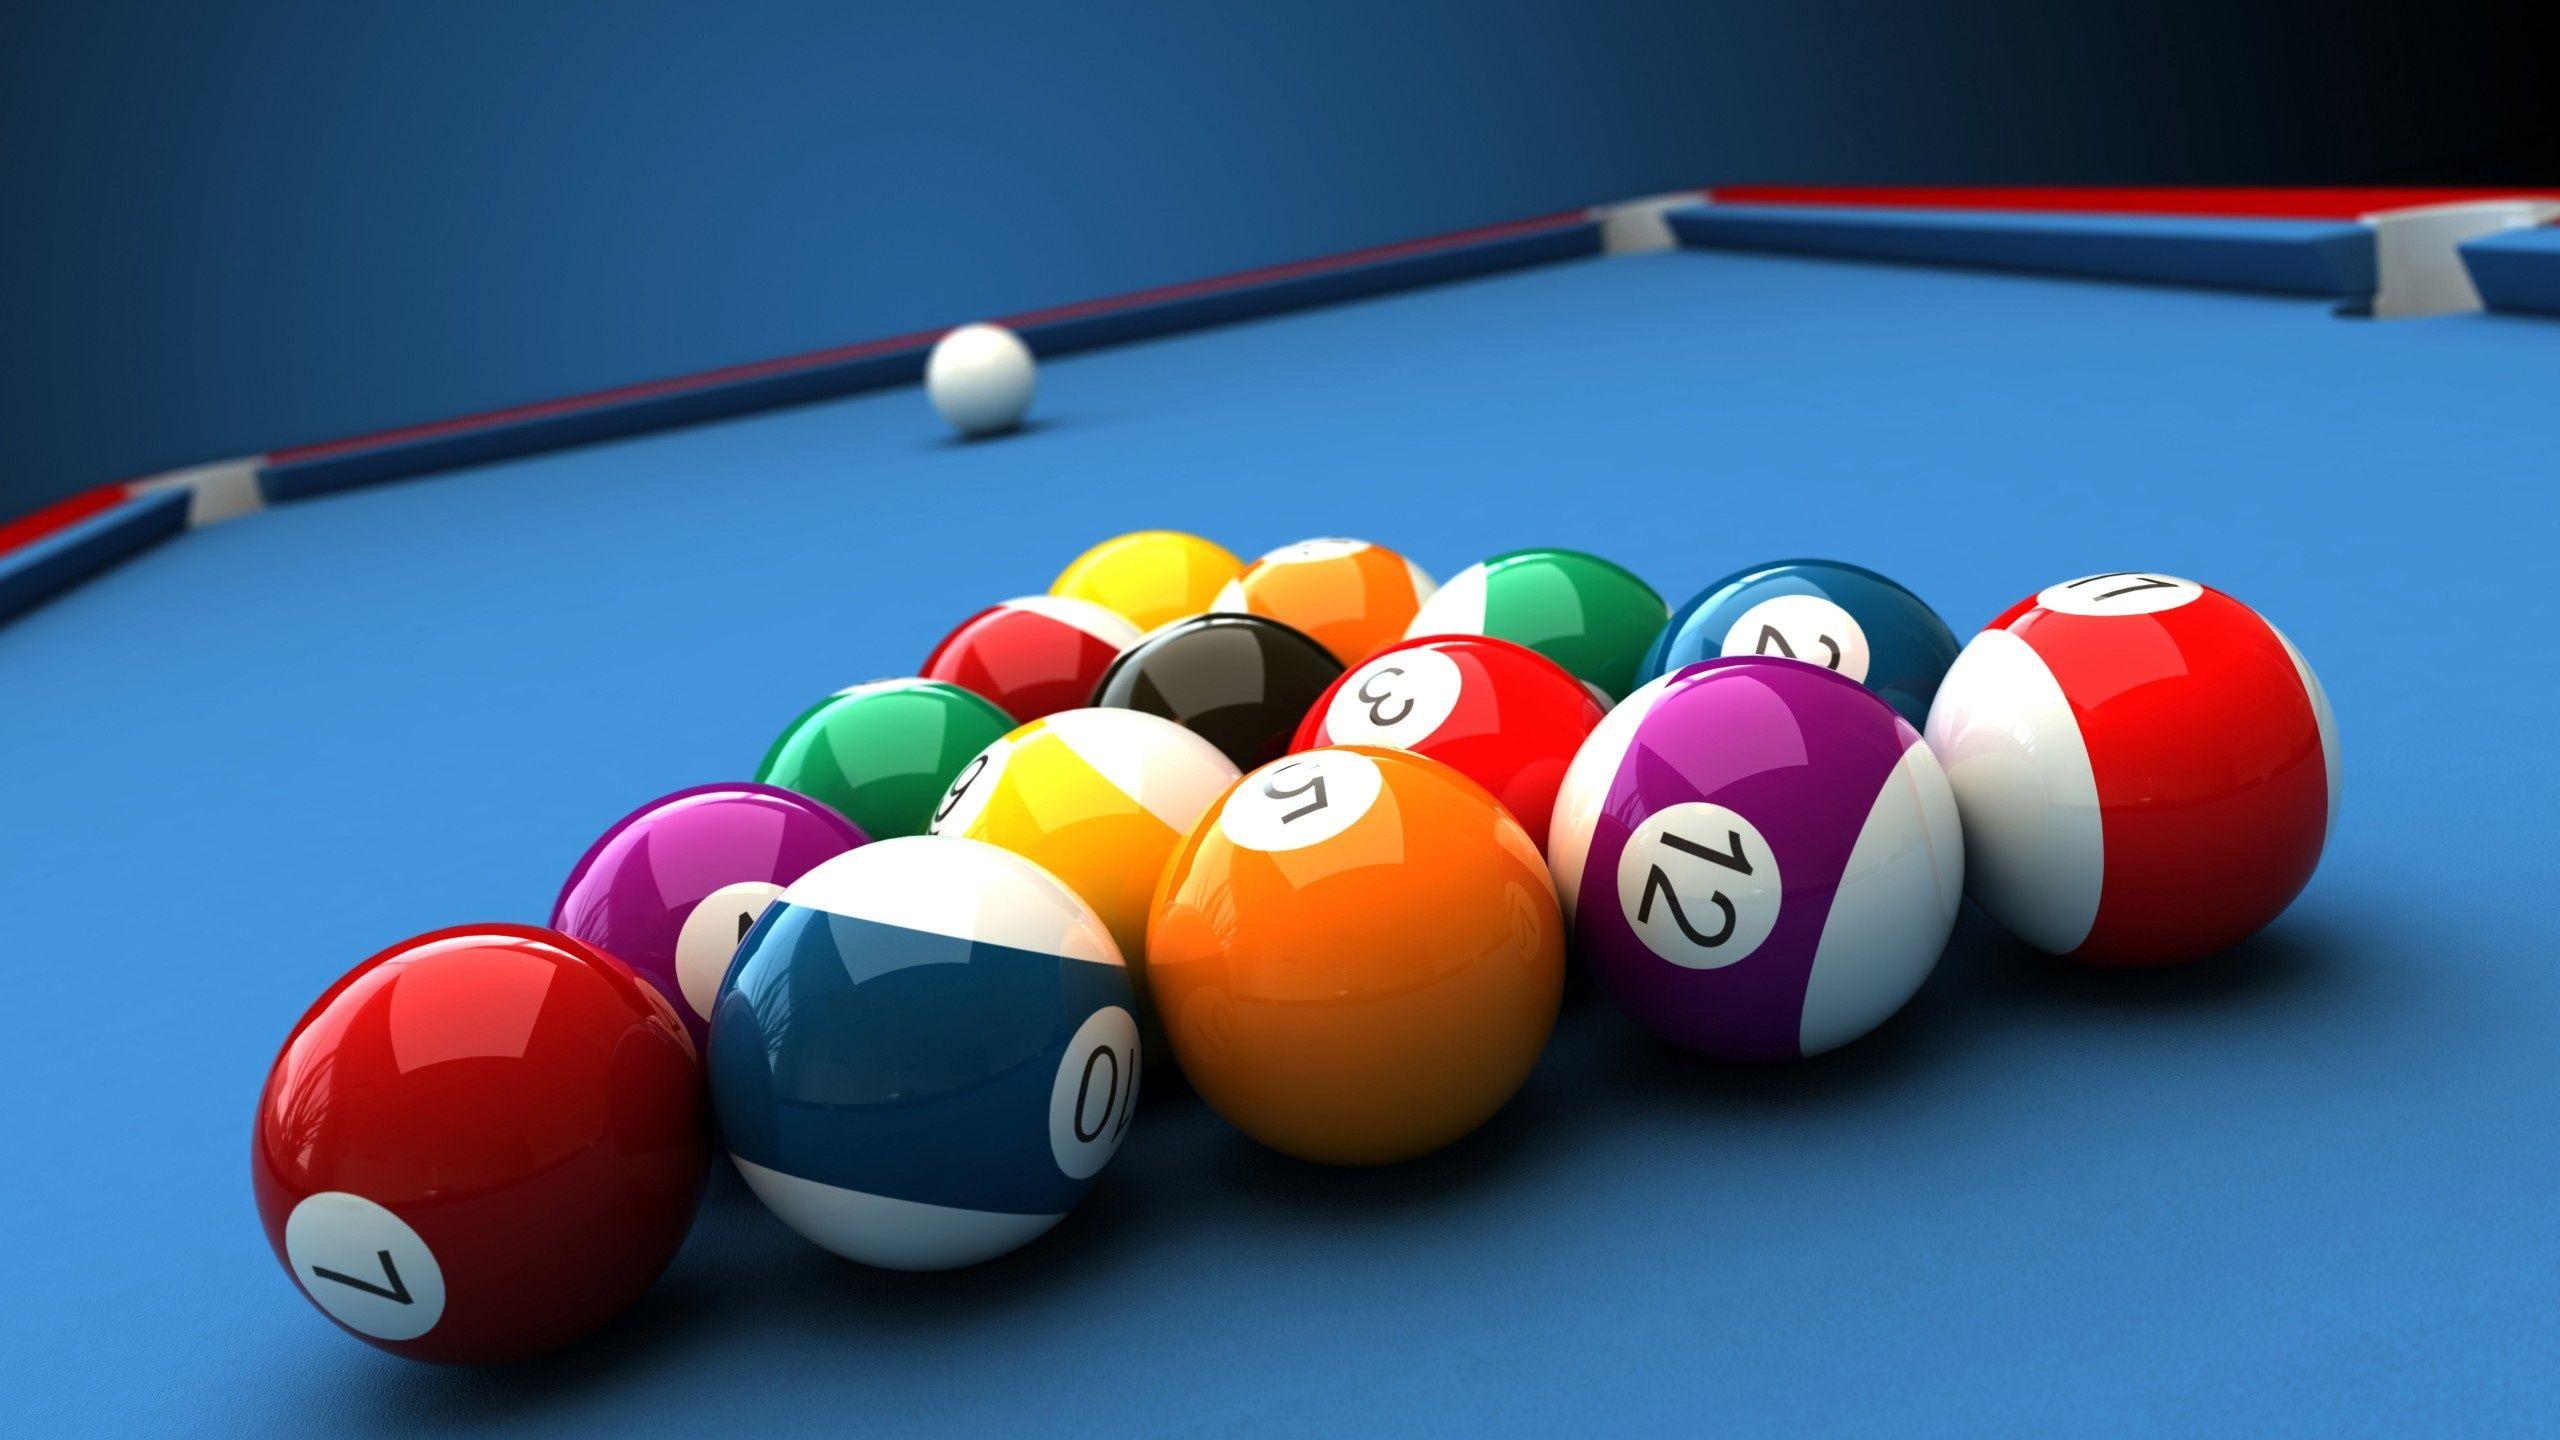 3D 8 Ball Pool [2560 x 1440]. WALLPAPERS. Wallpaper and 3D